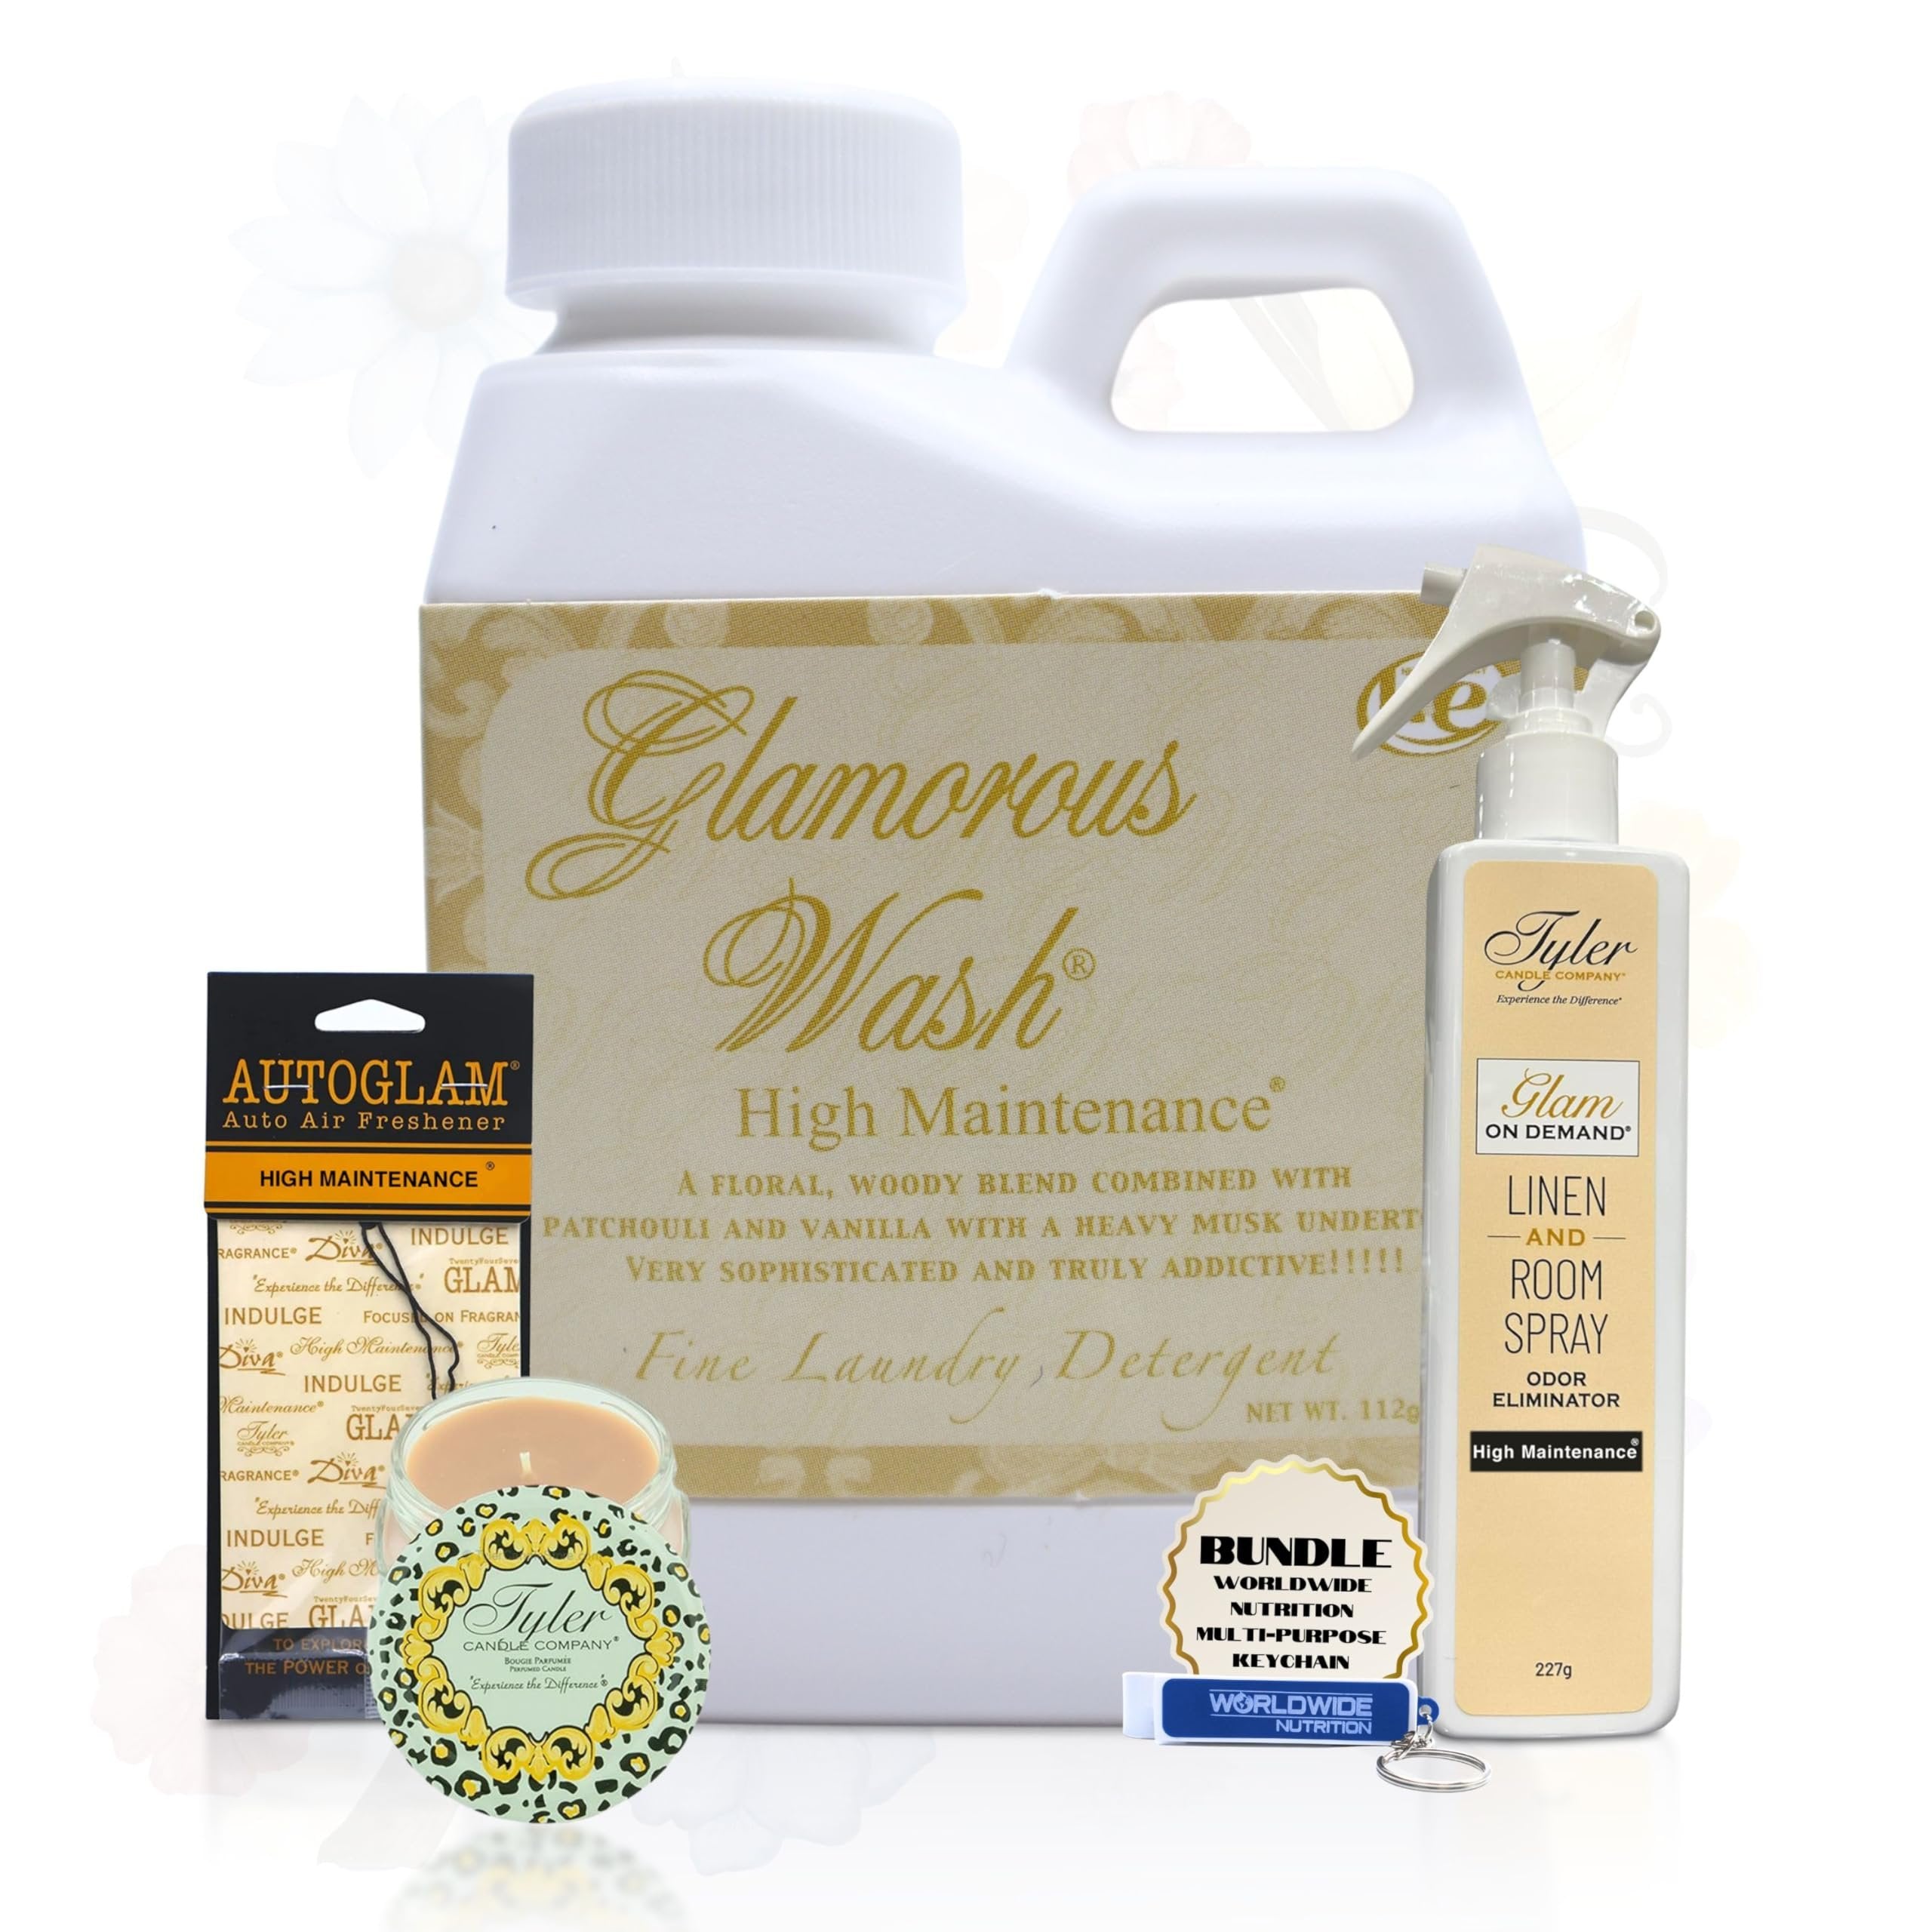 Tyler Candle Company Glamorous Gift Suite VI High Maintenance - Glam On Demand Linen and Room Spray Bottle, Prestige Candle, Glam Wash Laundry Detergent, Autoglam Air Freshener & Keychain